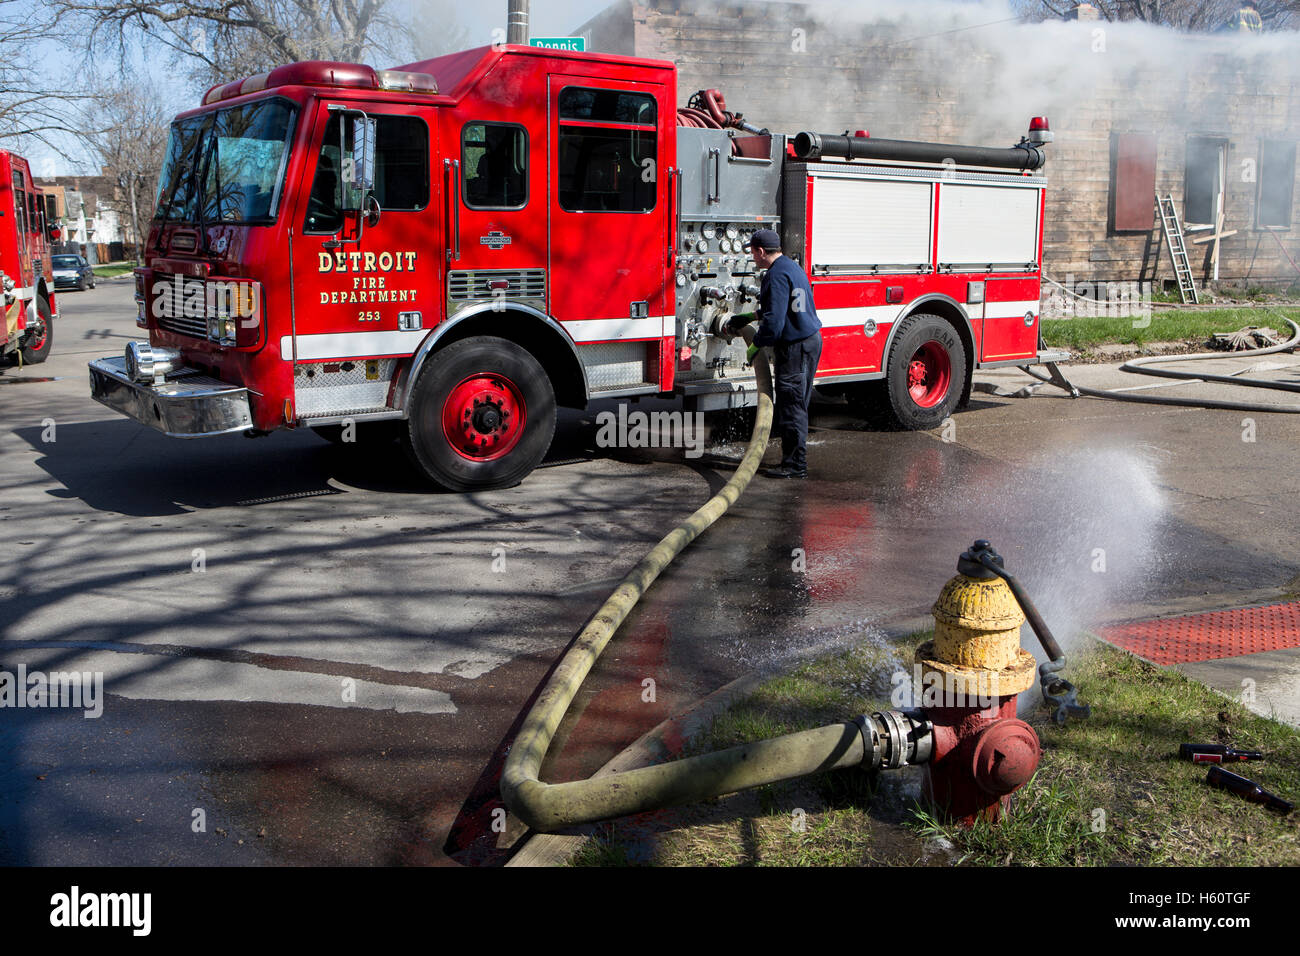 Fire engine pumper hooked to fire hydrant at house fire, Detroit, Michigan USA Stock Photo